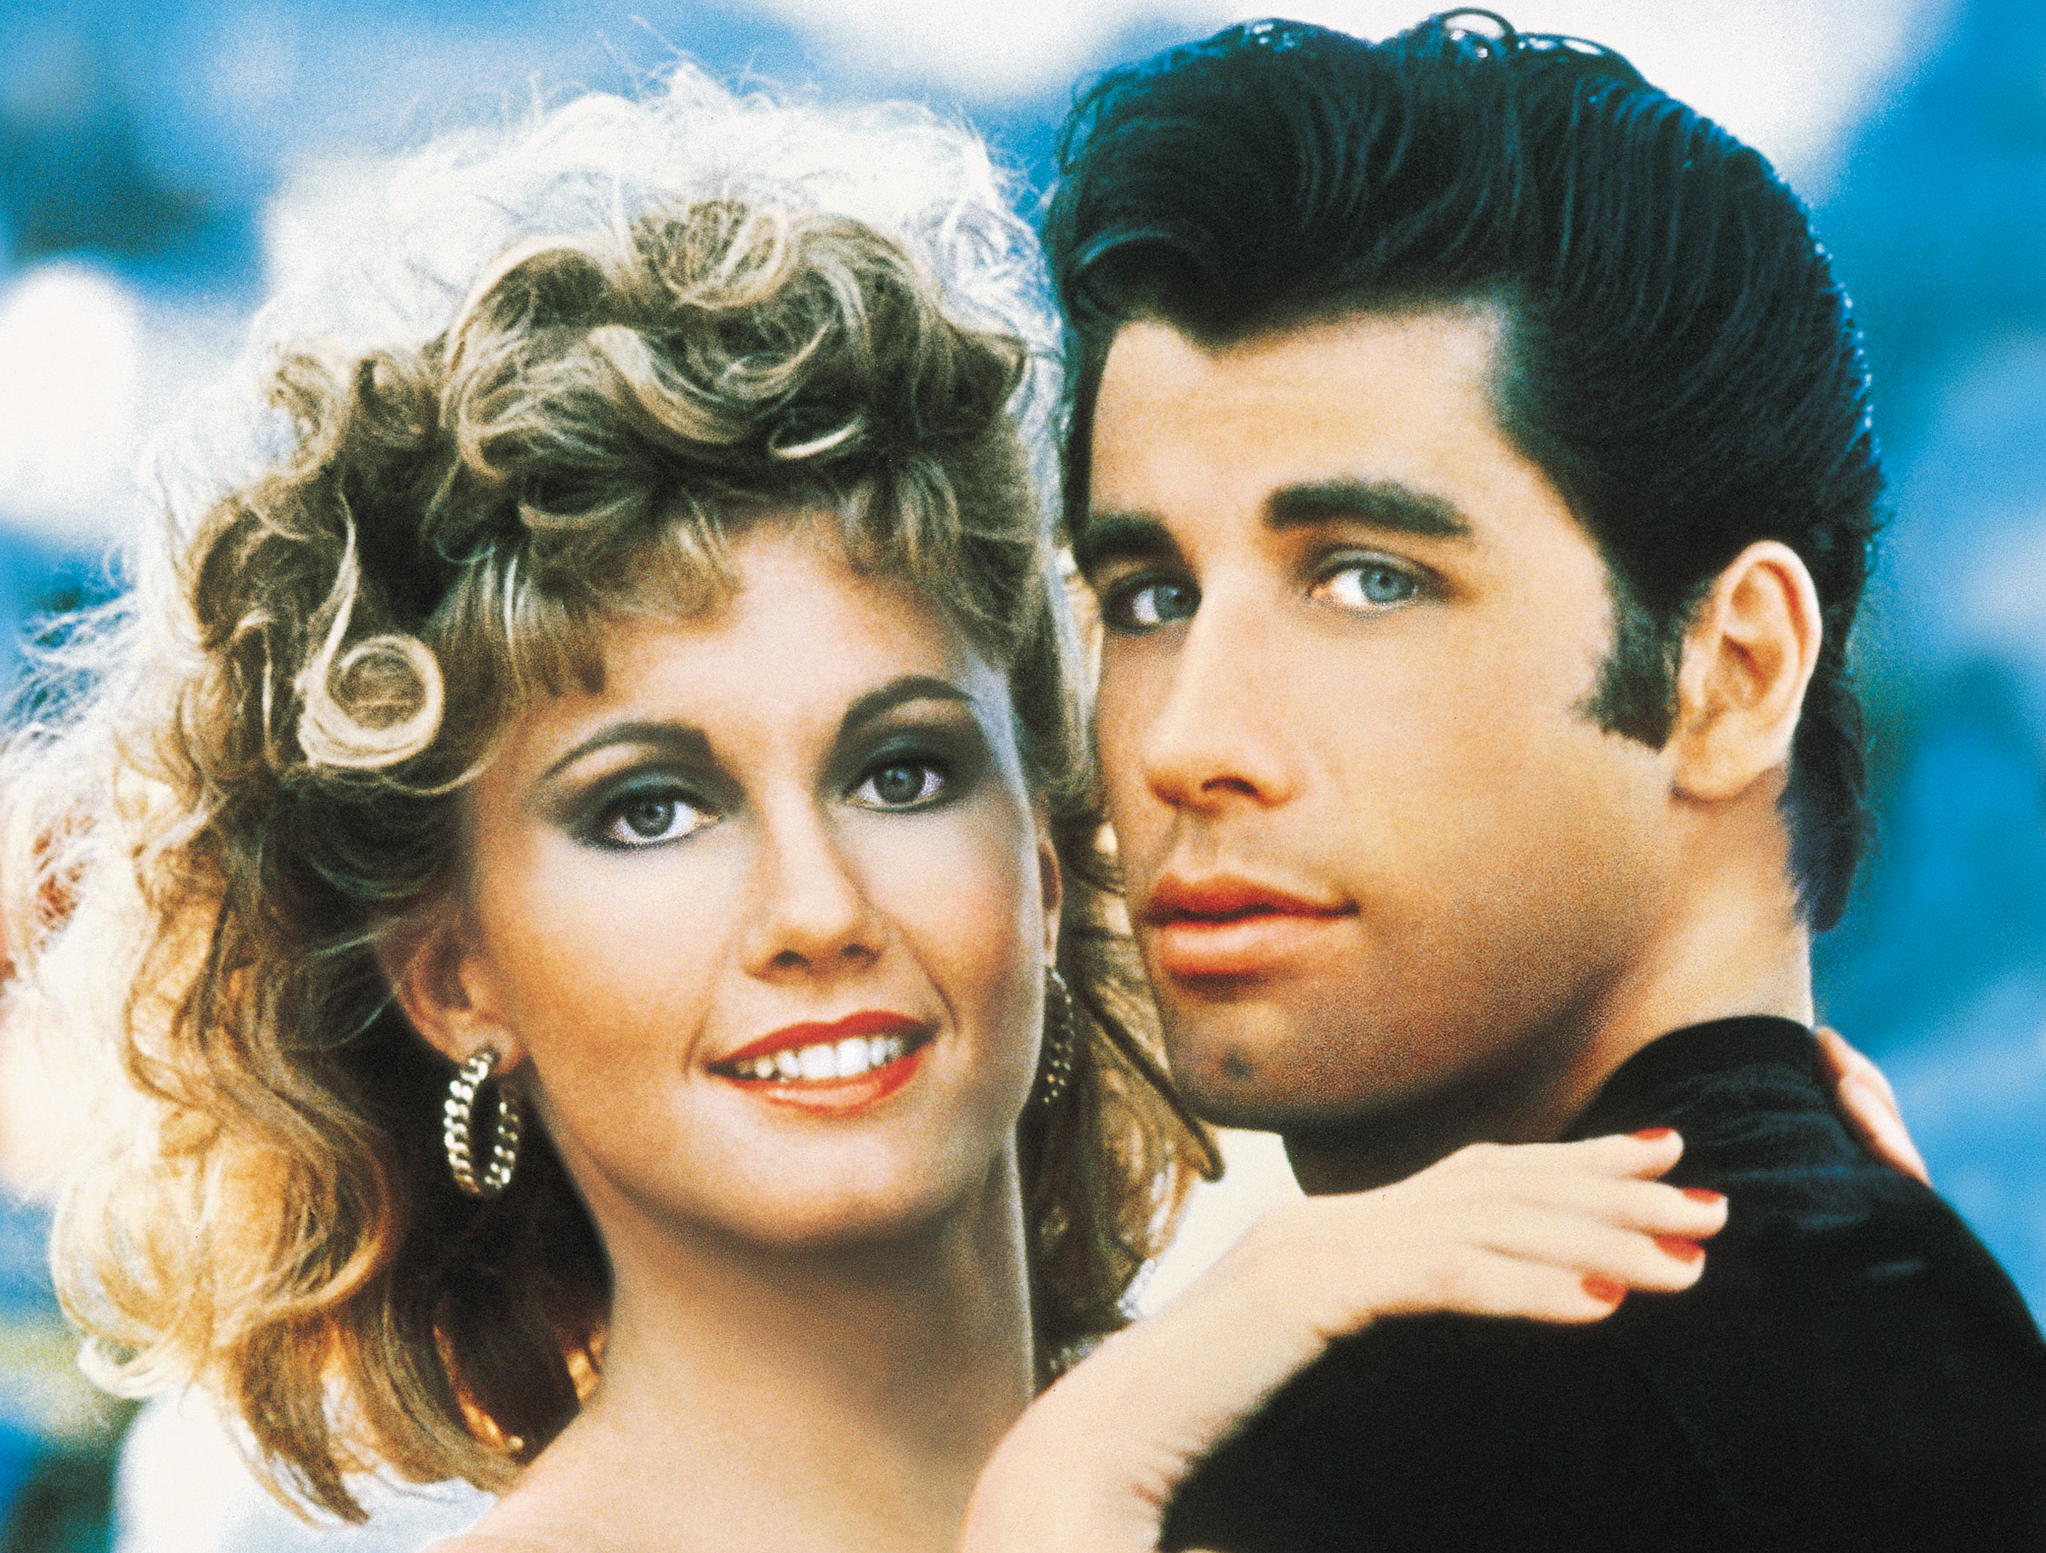 Is Grease on Netflix? What to Watch